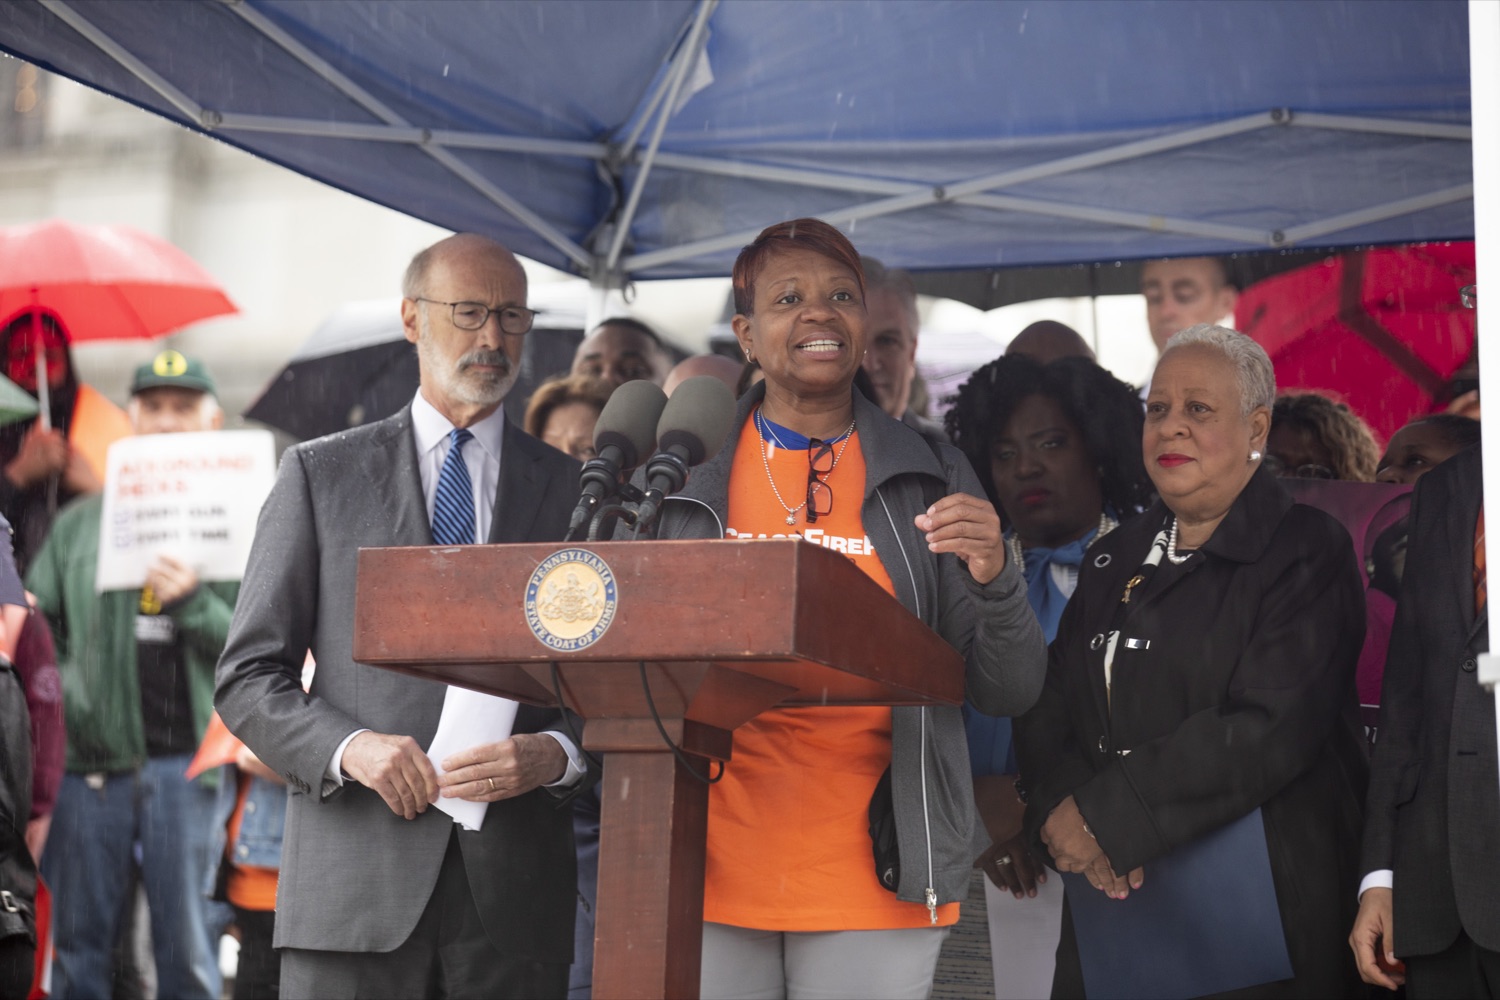 Tina Ford, Mother of Armani, who was lost to gun violence 3 years ago, calls for legislative action to save lives against gun violence, in Harrisburg, PA on April 26, 2022.<br><a href="https://filesource.amperwave.net/commonwealthofpa/photo/20782_gov_ceaseFirePA_15.JPG" target="_blank">⇣ Download Photo</a>